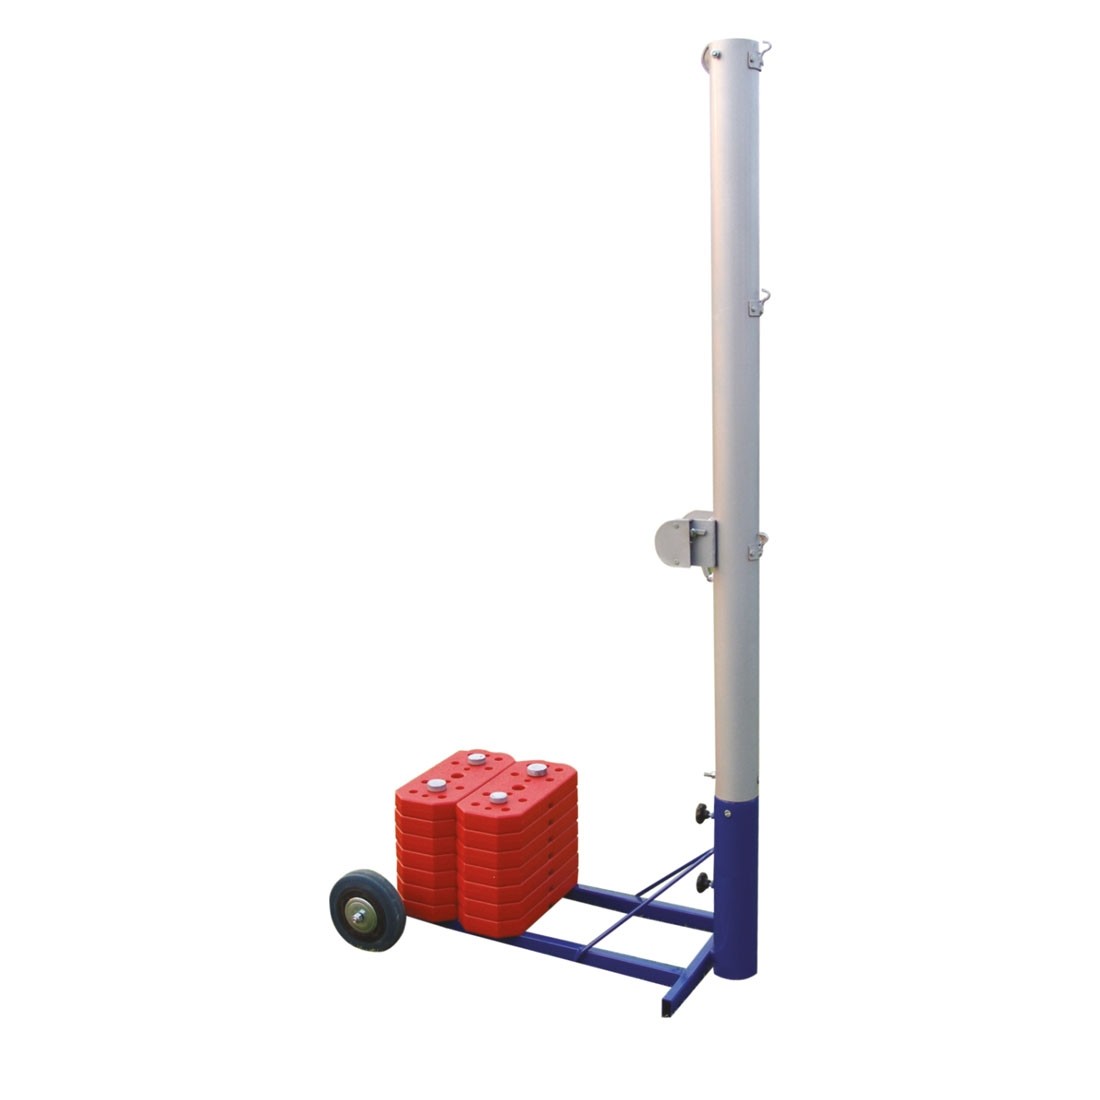 VOLLEYBALL POST PORTABLE ALLUMINIUM WITH 75KG WEIGHT